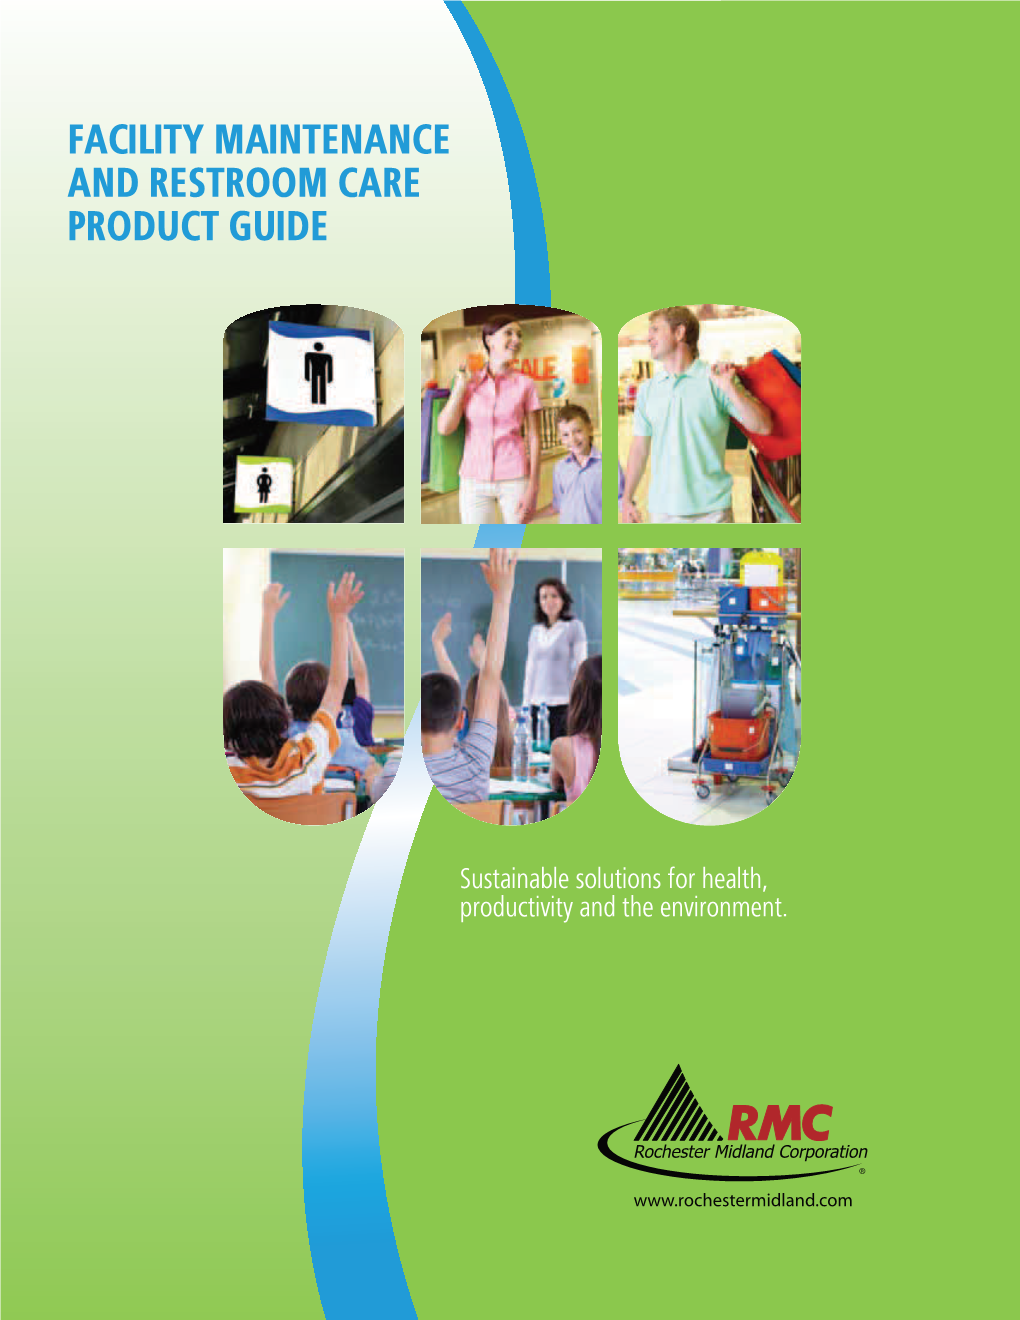 Facility Maintenance and Restroom Care Product Guide